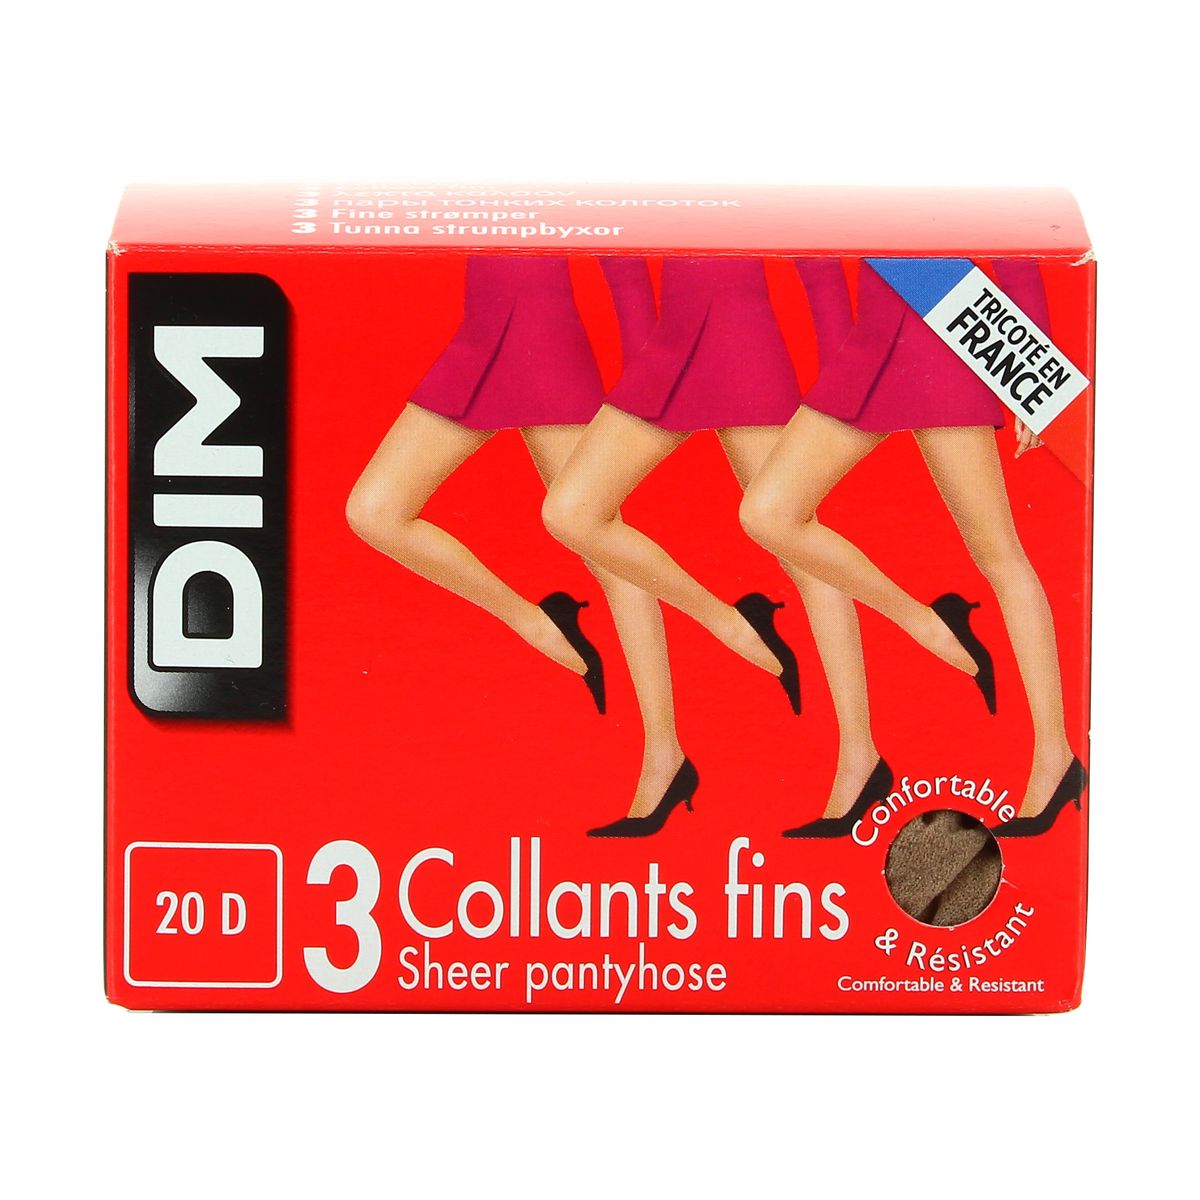 collants taille 5